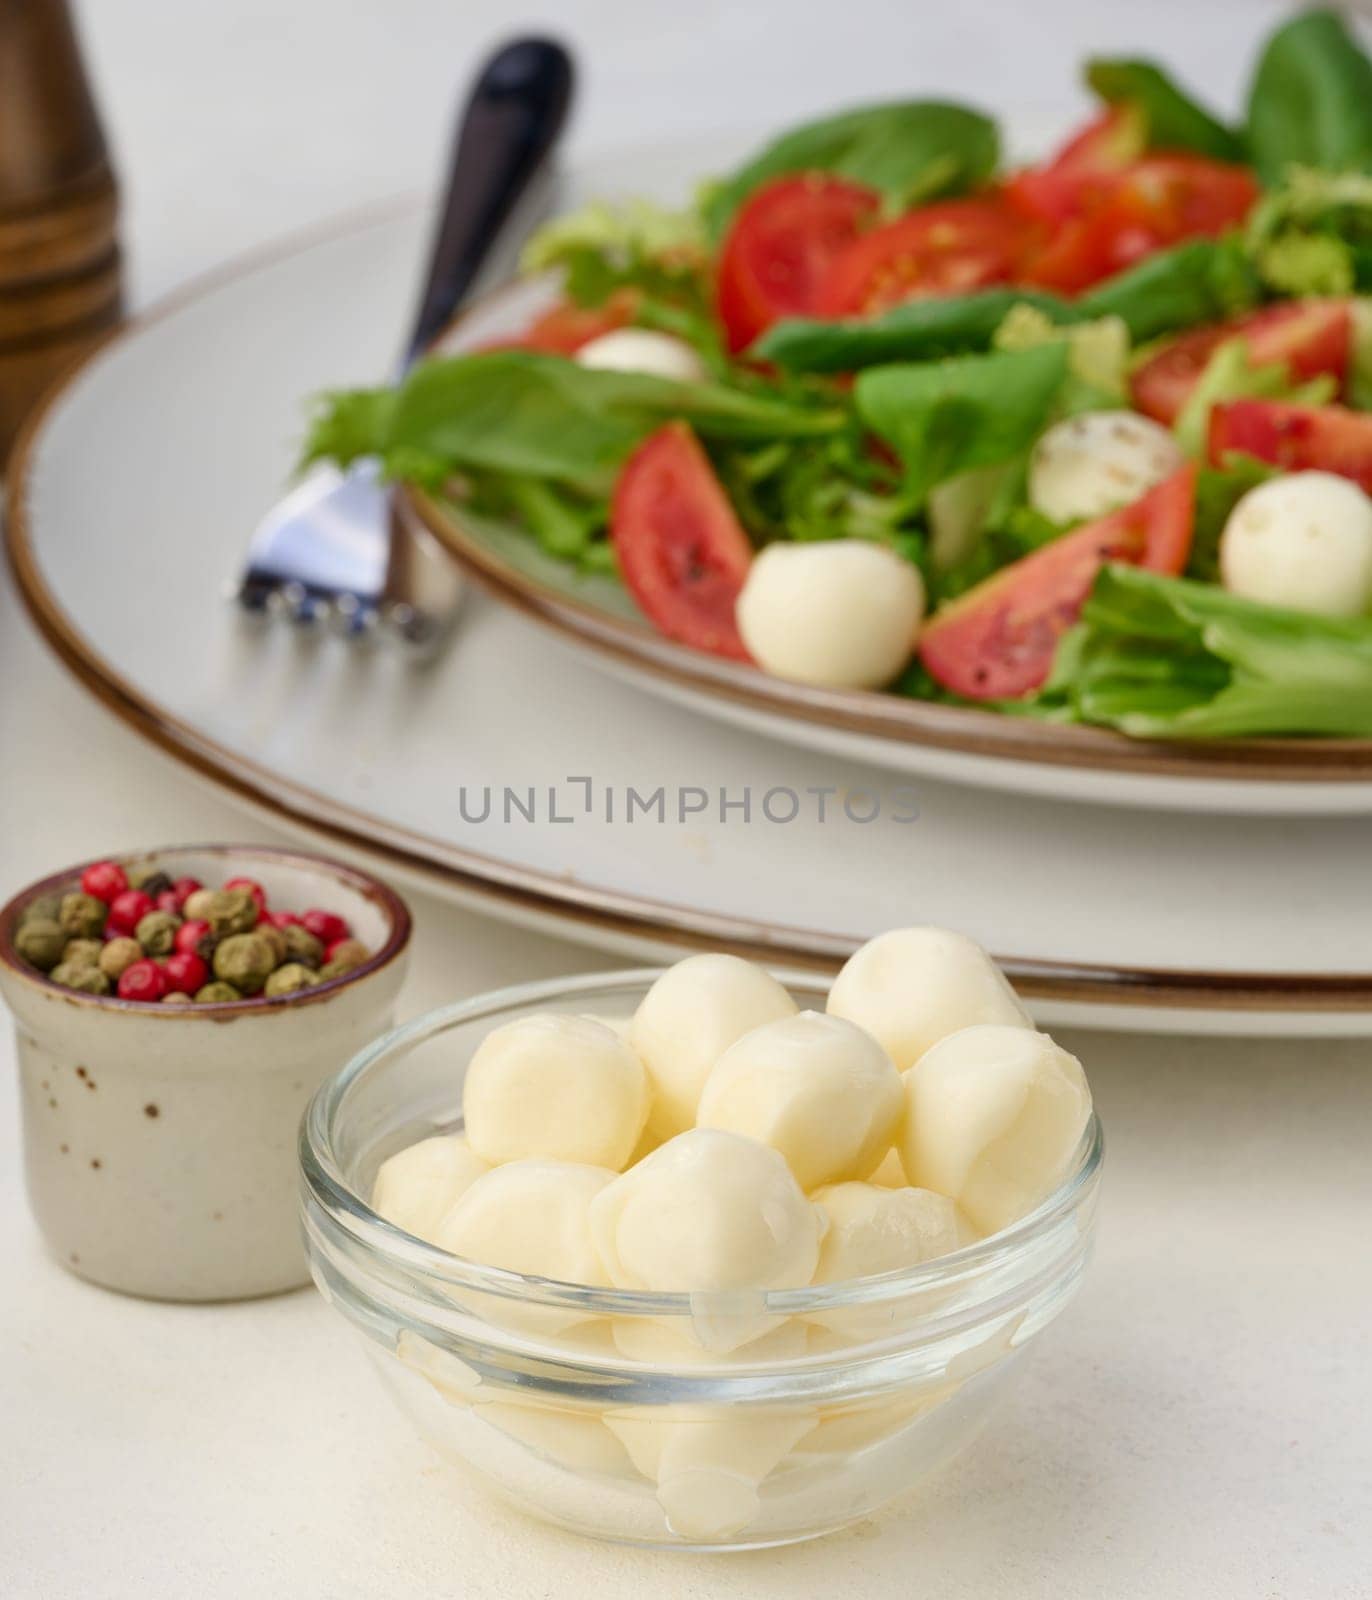 Mozzarella balls in glass bowl and salad on a white background by ndanko